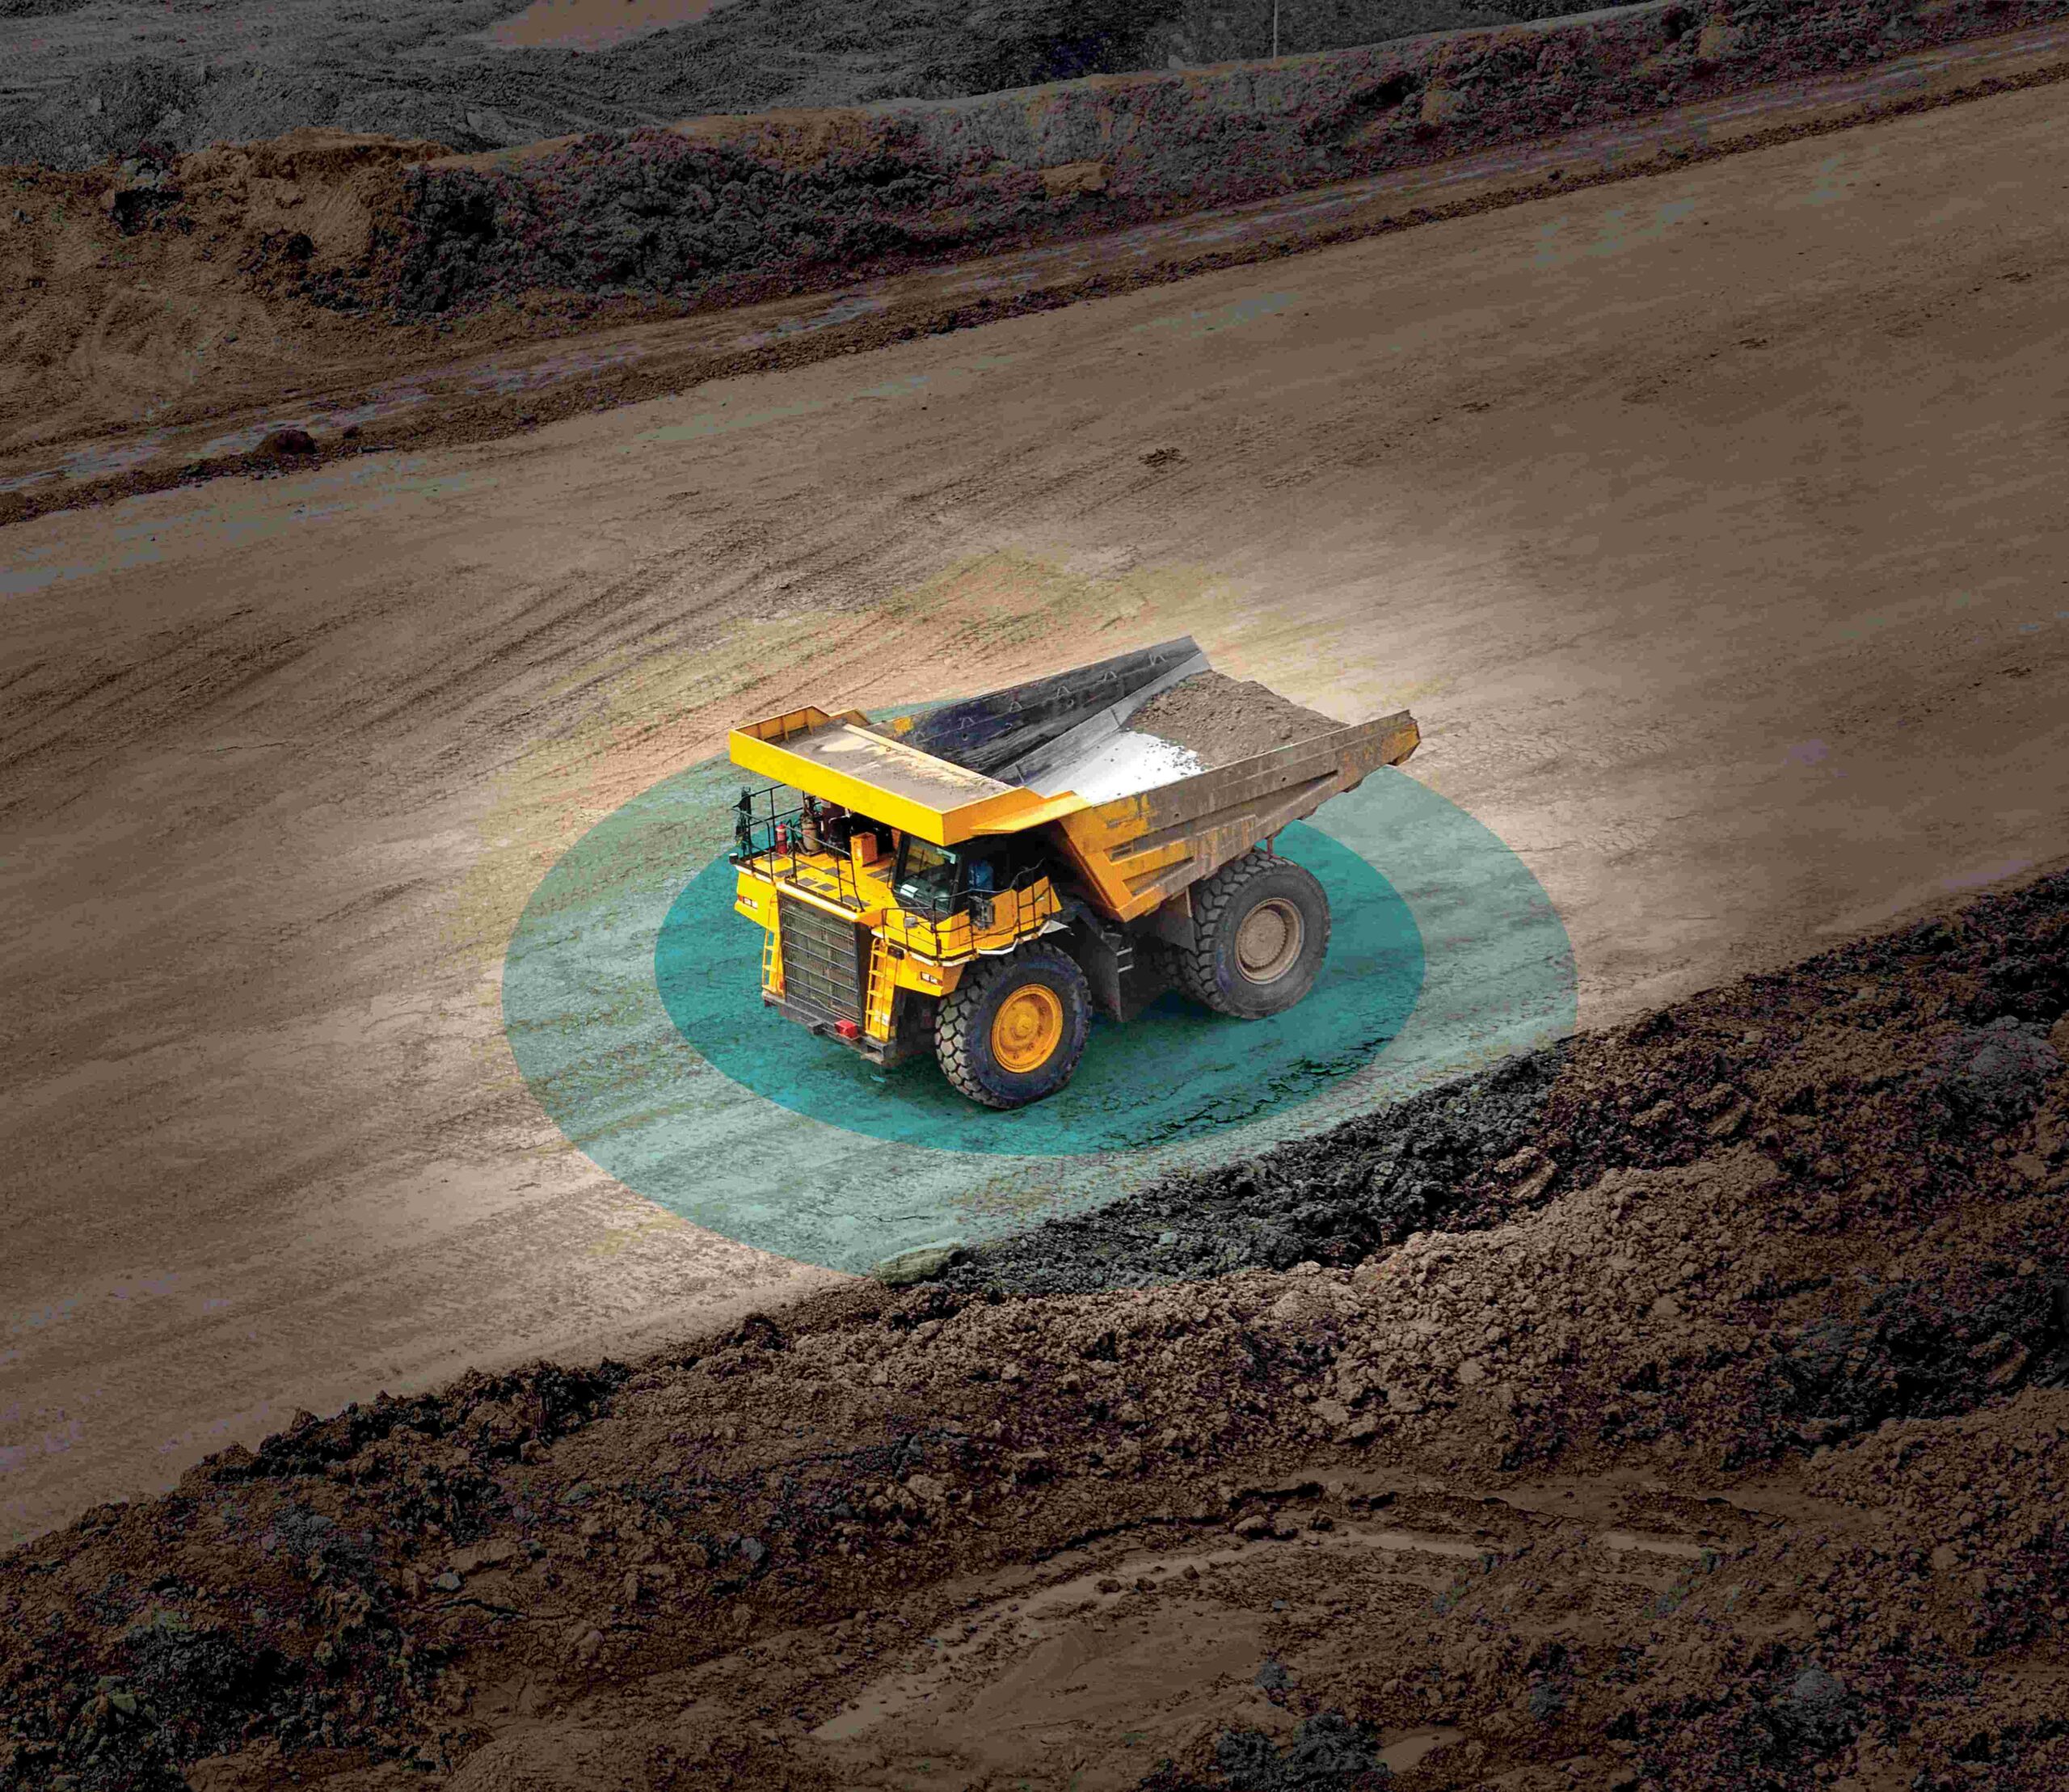 Globally, telematics and data technology are taking root in the quarrying sector.